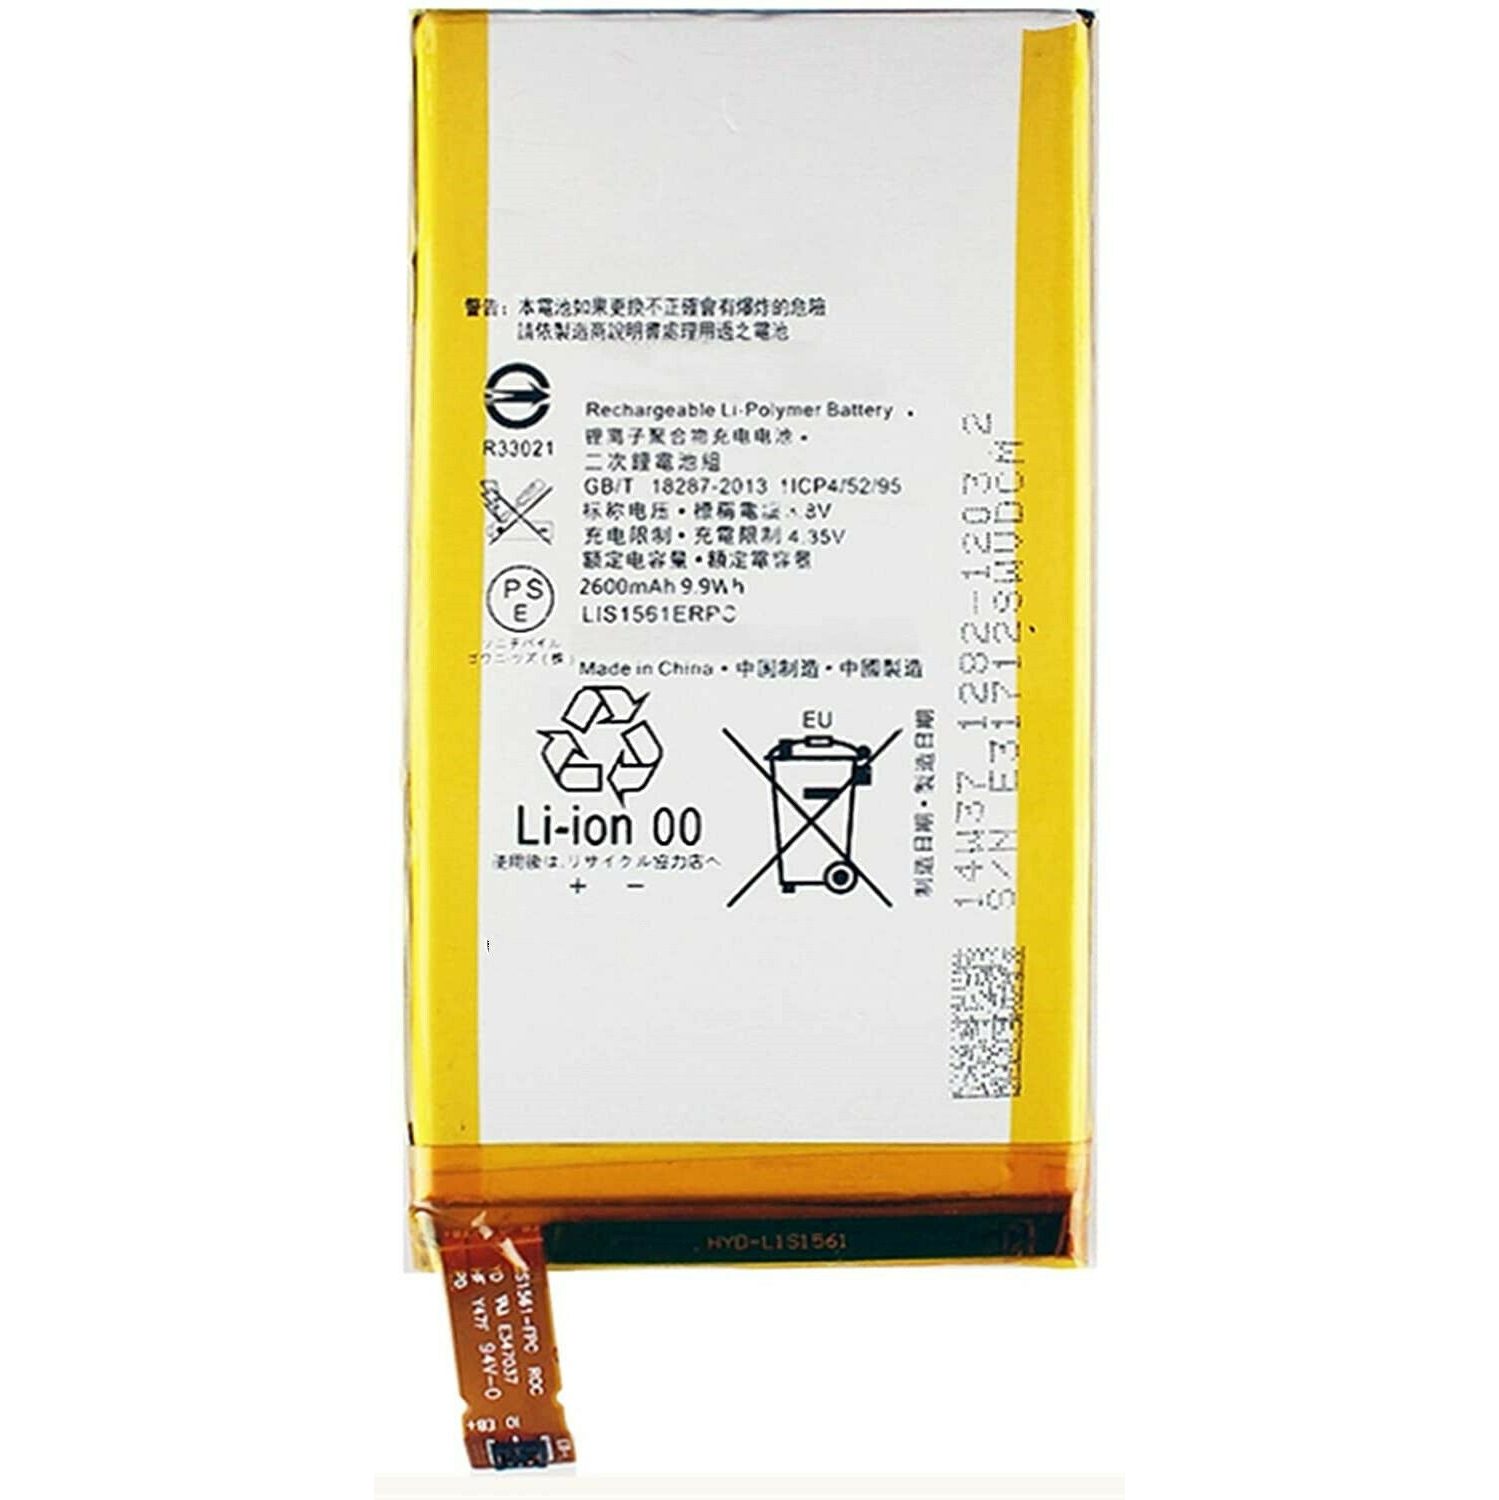 Replacement Battery-Compatible with Sony Xperia Z3 Compact C4 LIS1561ERPC